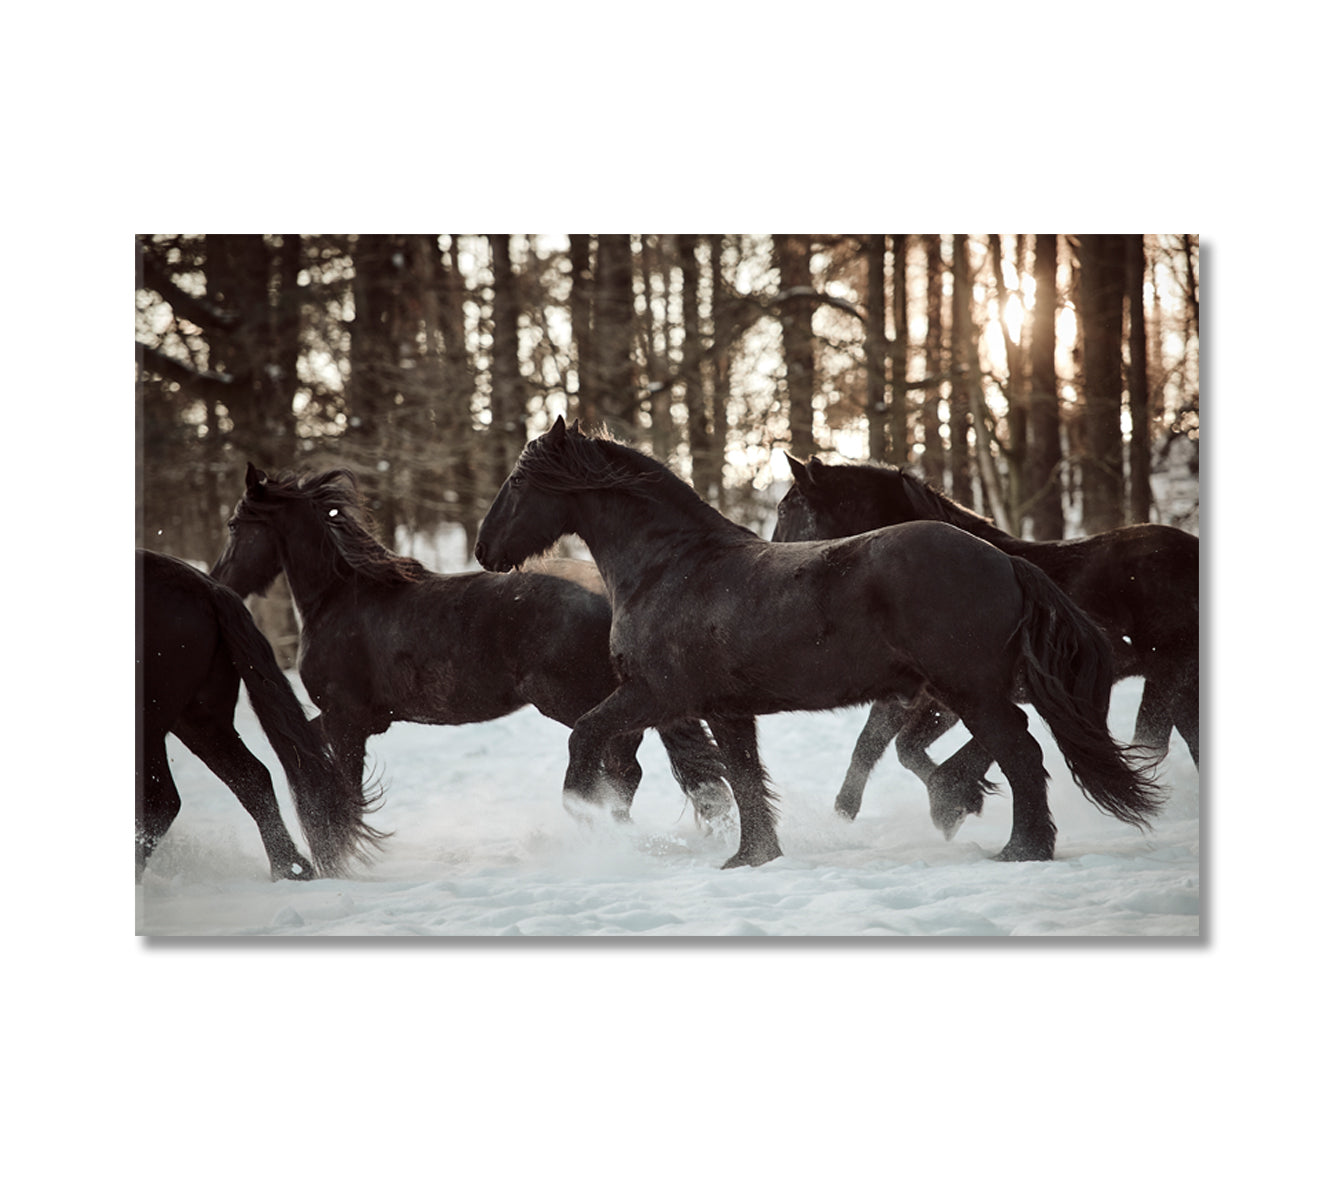 Friesian Horses Running in Winter Forest Canvas Print-Canvas Print-CetArt-1 Panel-24x16 inches-CetArt